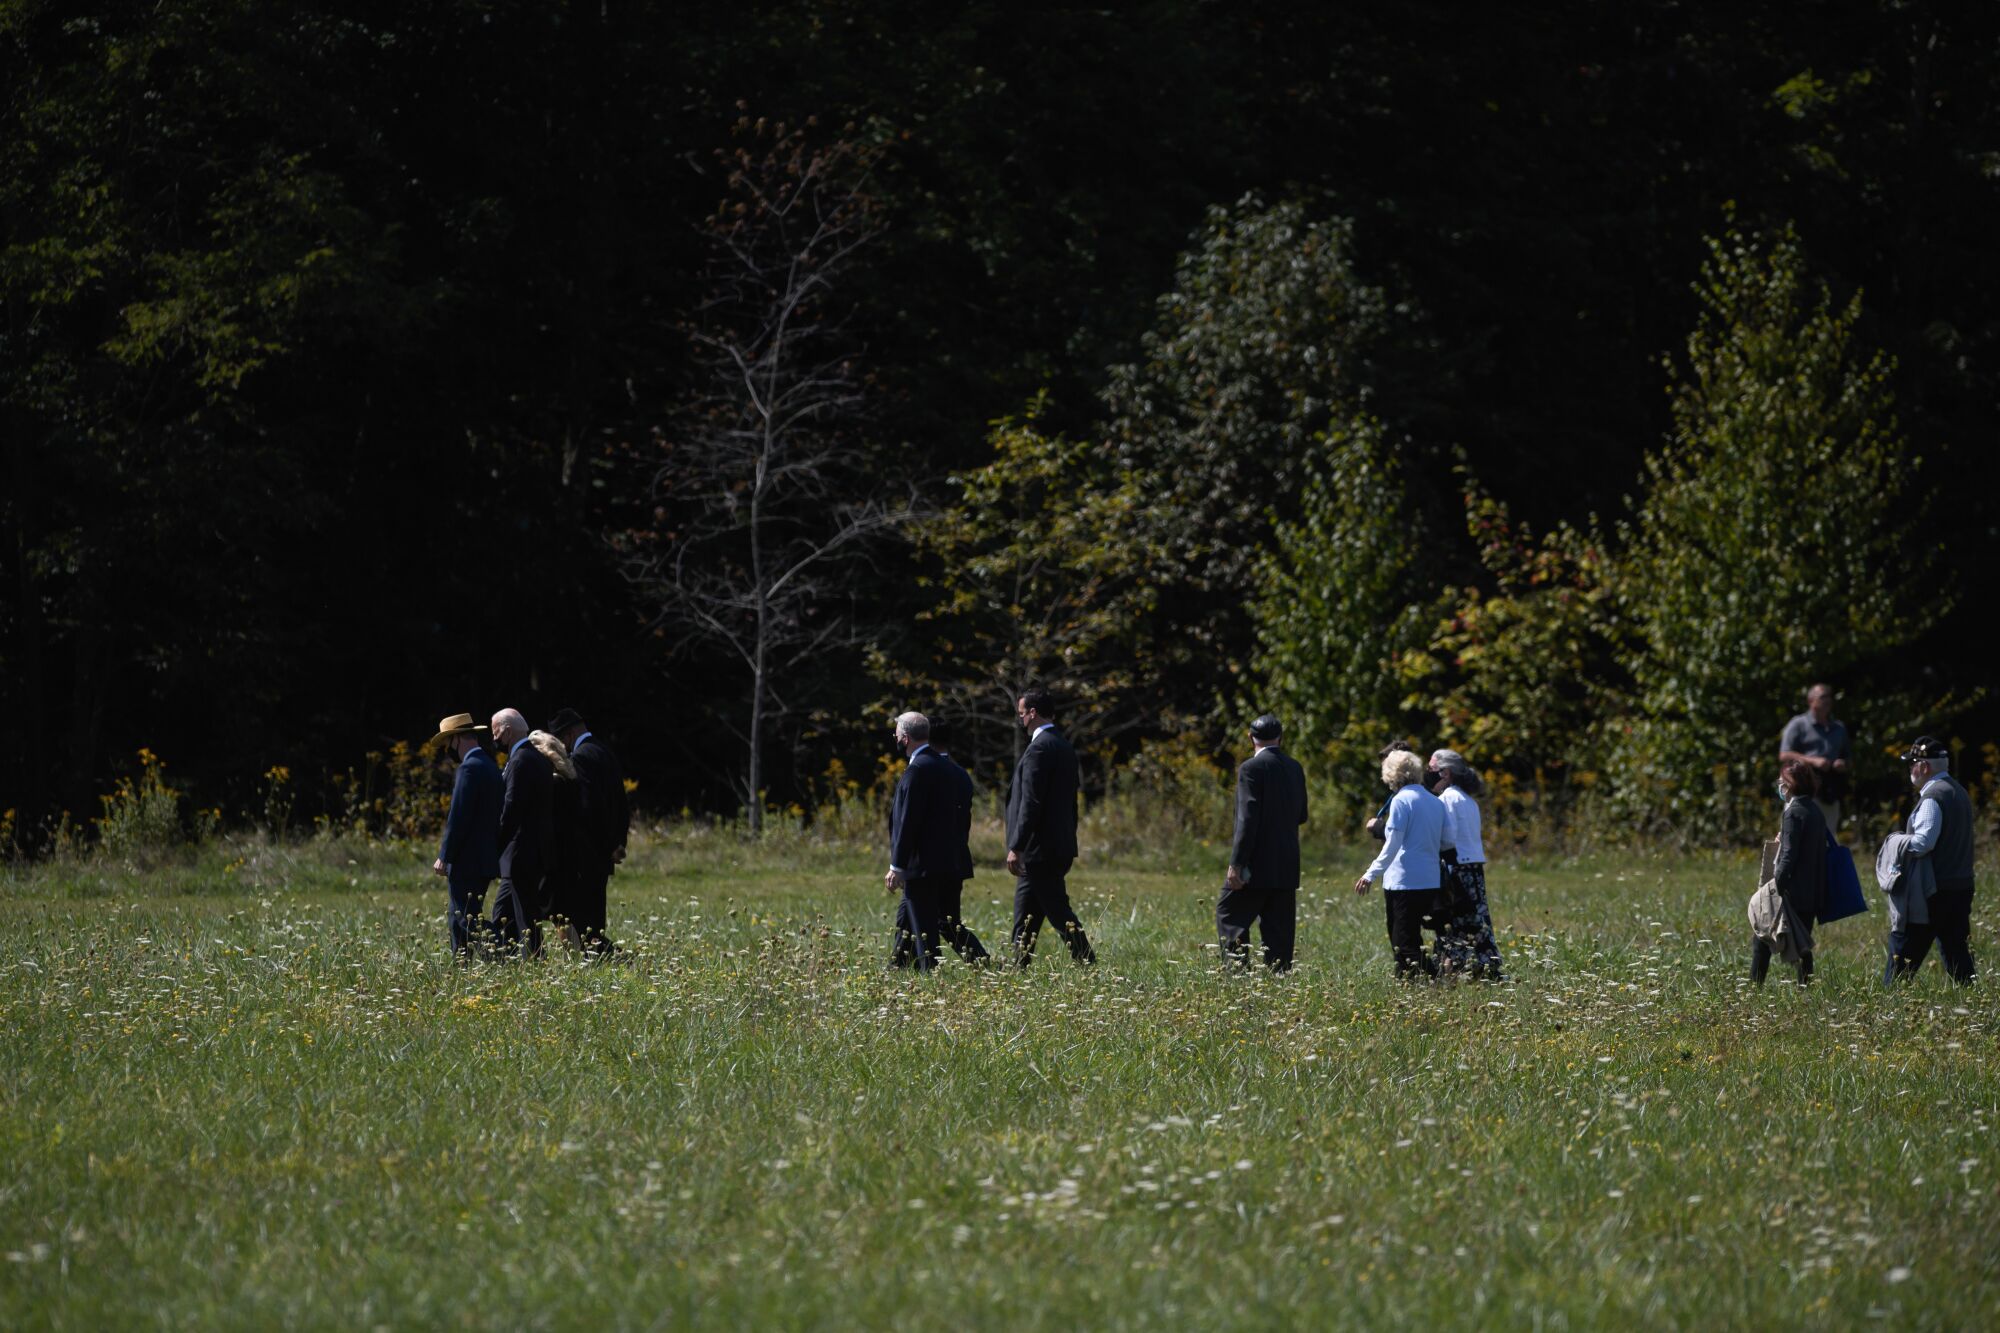 Several people in suits and dresses walk across a grassy field.